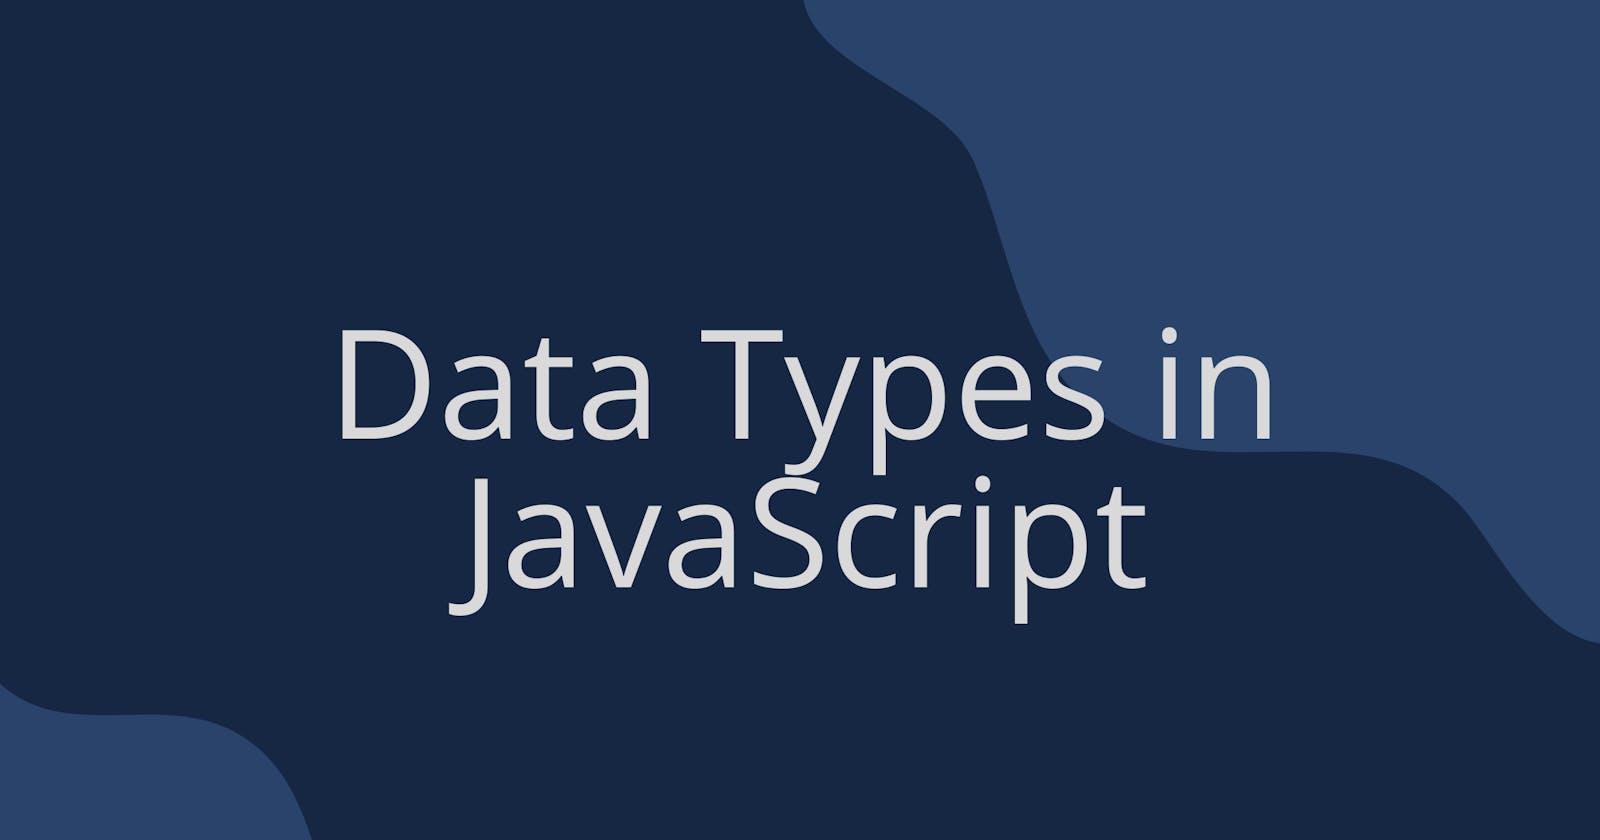 What are Data Types in JavaScript?